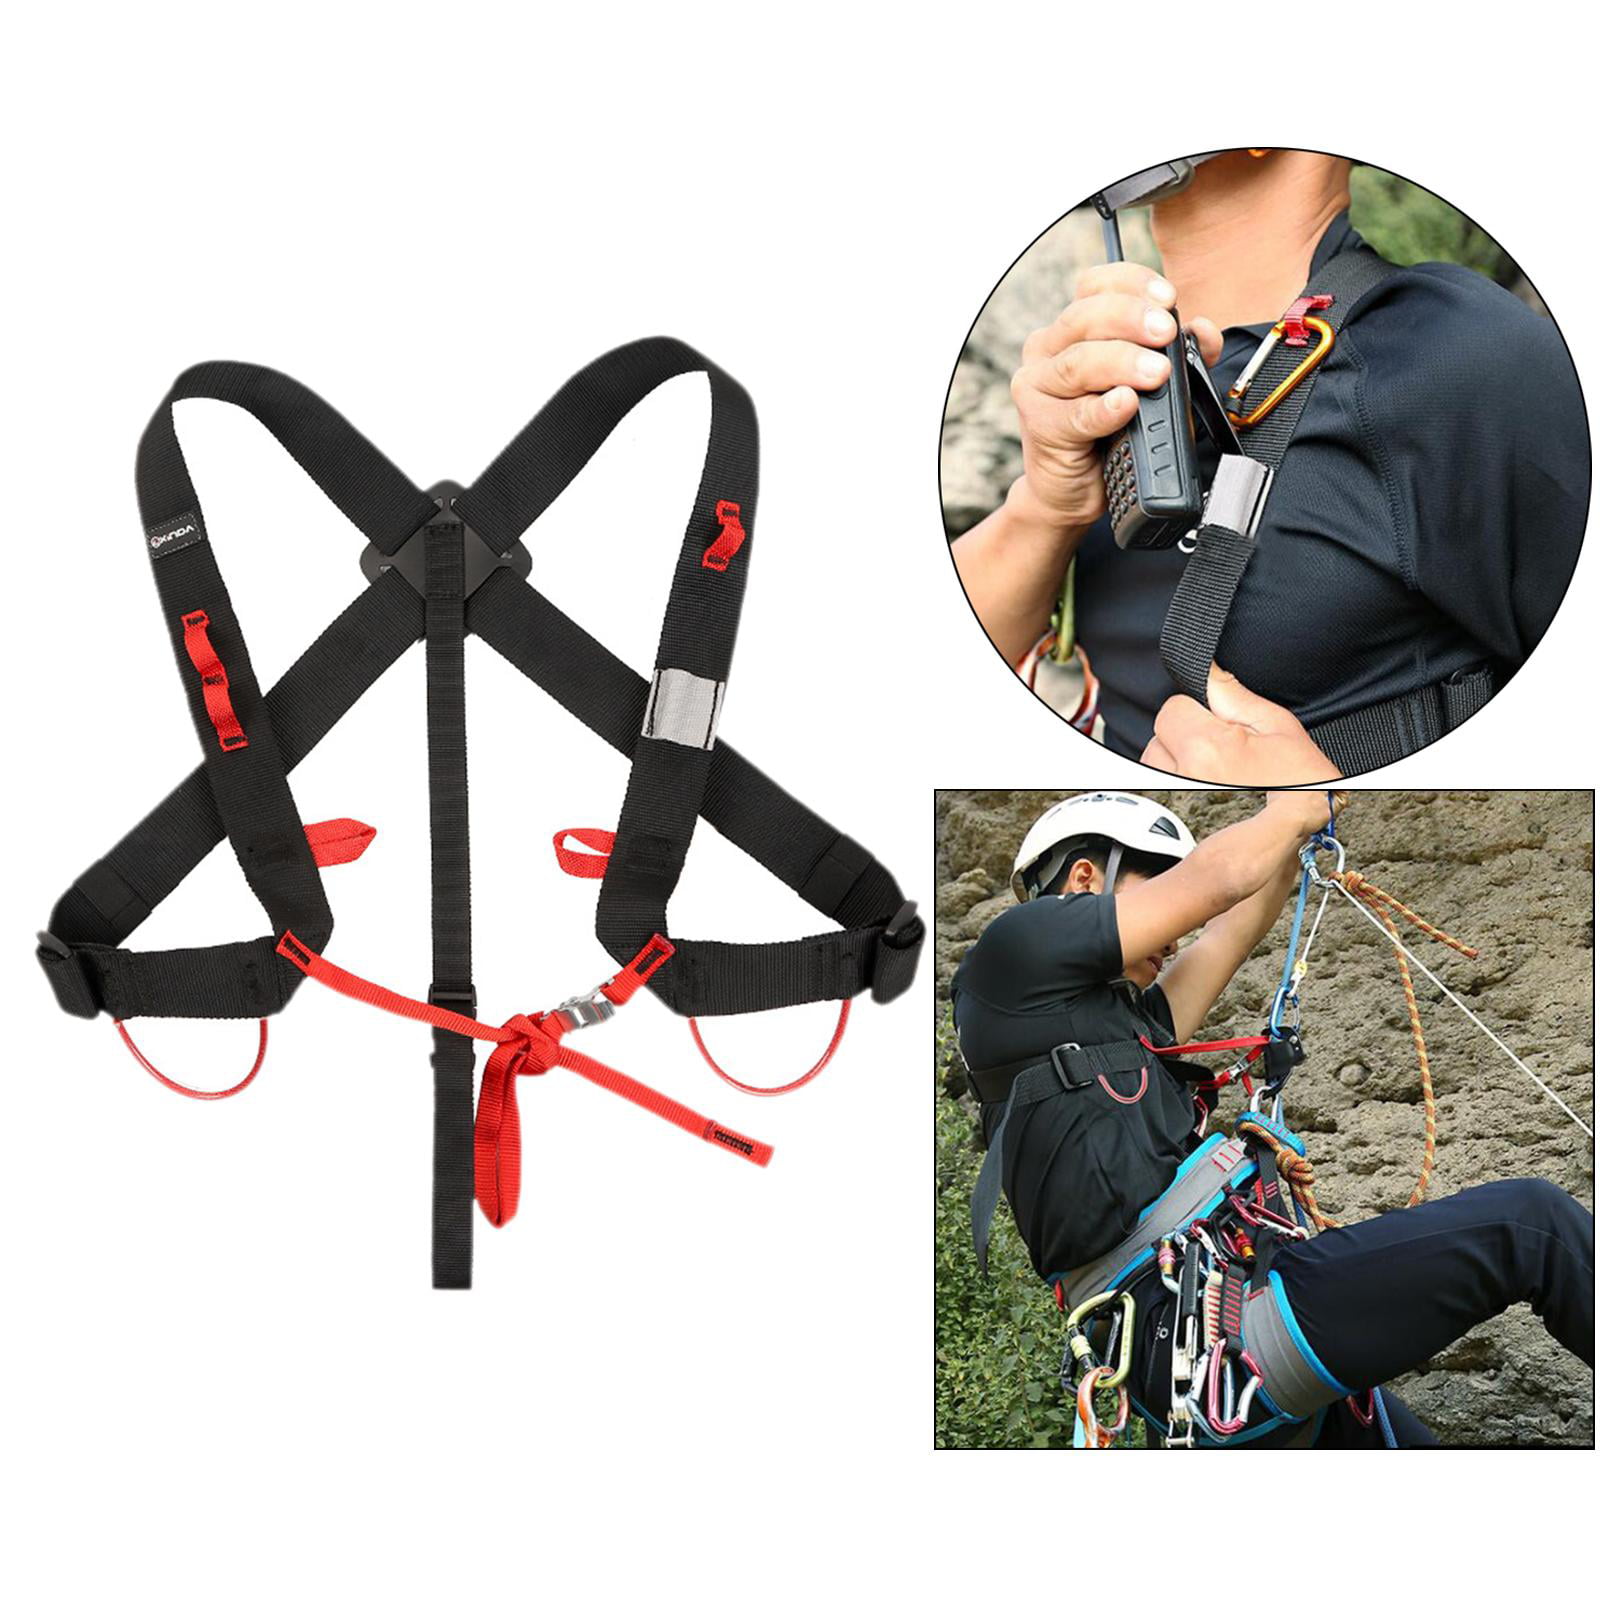 Safety Comfort¡­ Caving Rock Climbing Rappelling Equip Climbing Harness Safe Belts Guide Harness for Outward Band Expanding Training Full Body and Half Body Harness 